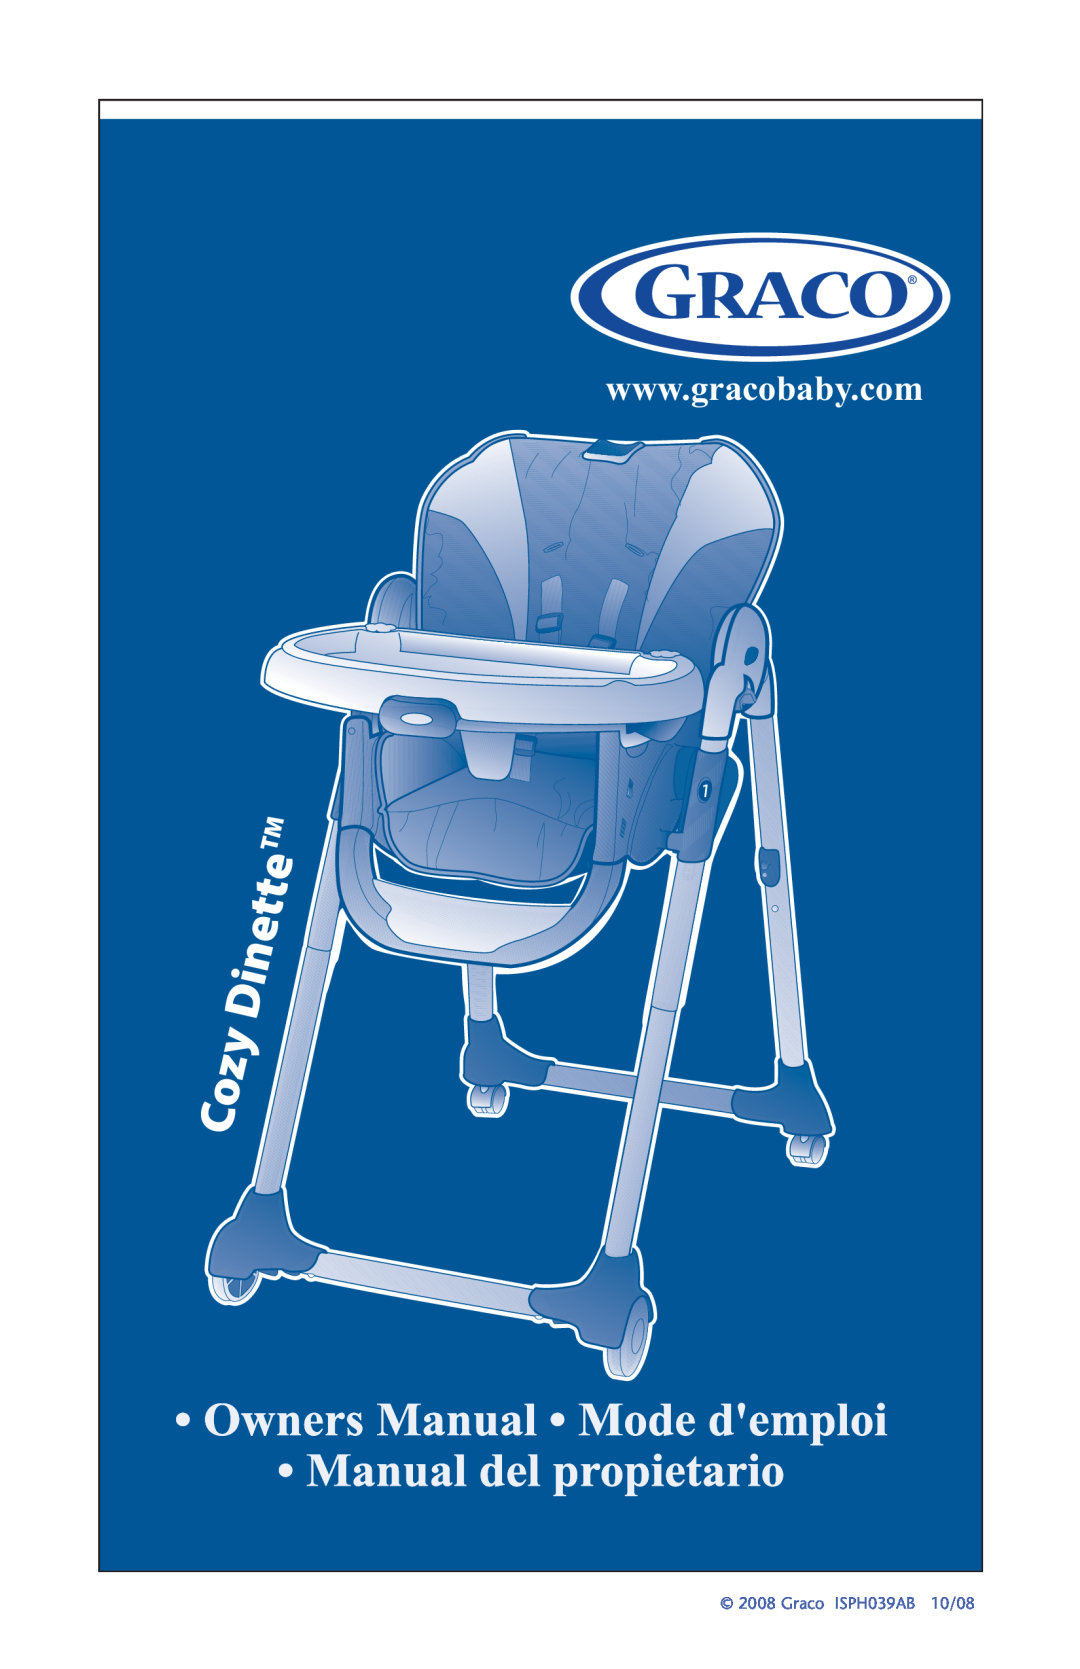 Graco CozyDinette manual Graco ISPH039AB, 10/08 